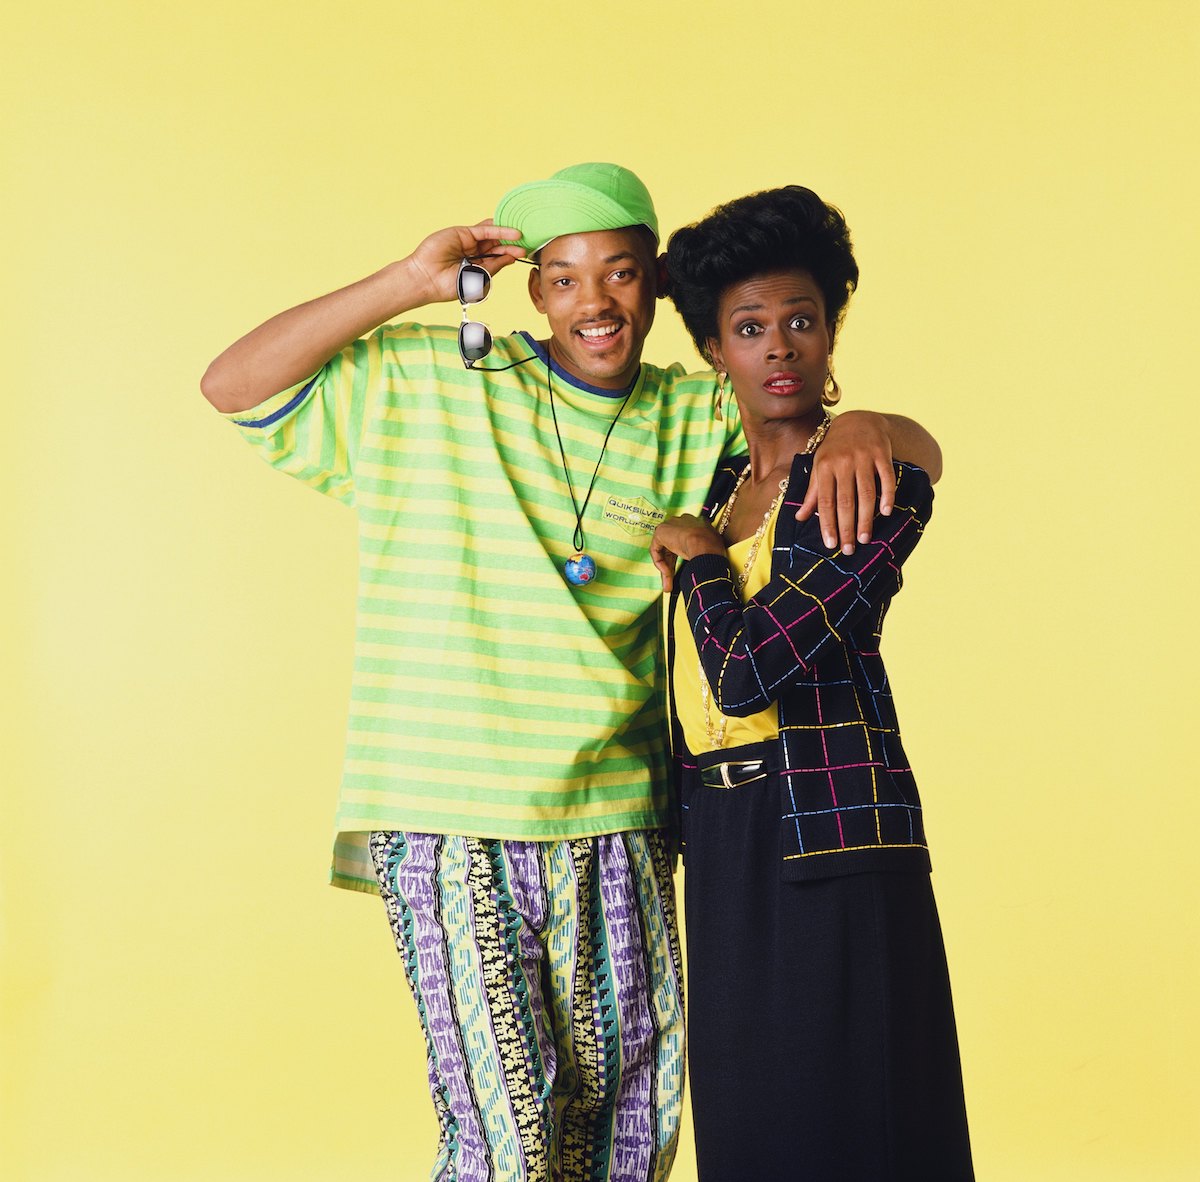 Will Smith as William 'Will' Smith, Janet Hubert as Vivian Banks in 'The Fresh Prince of Bel-Air